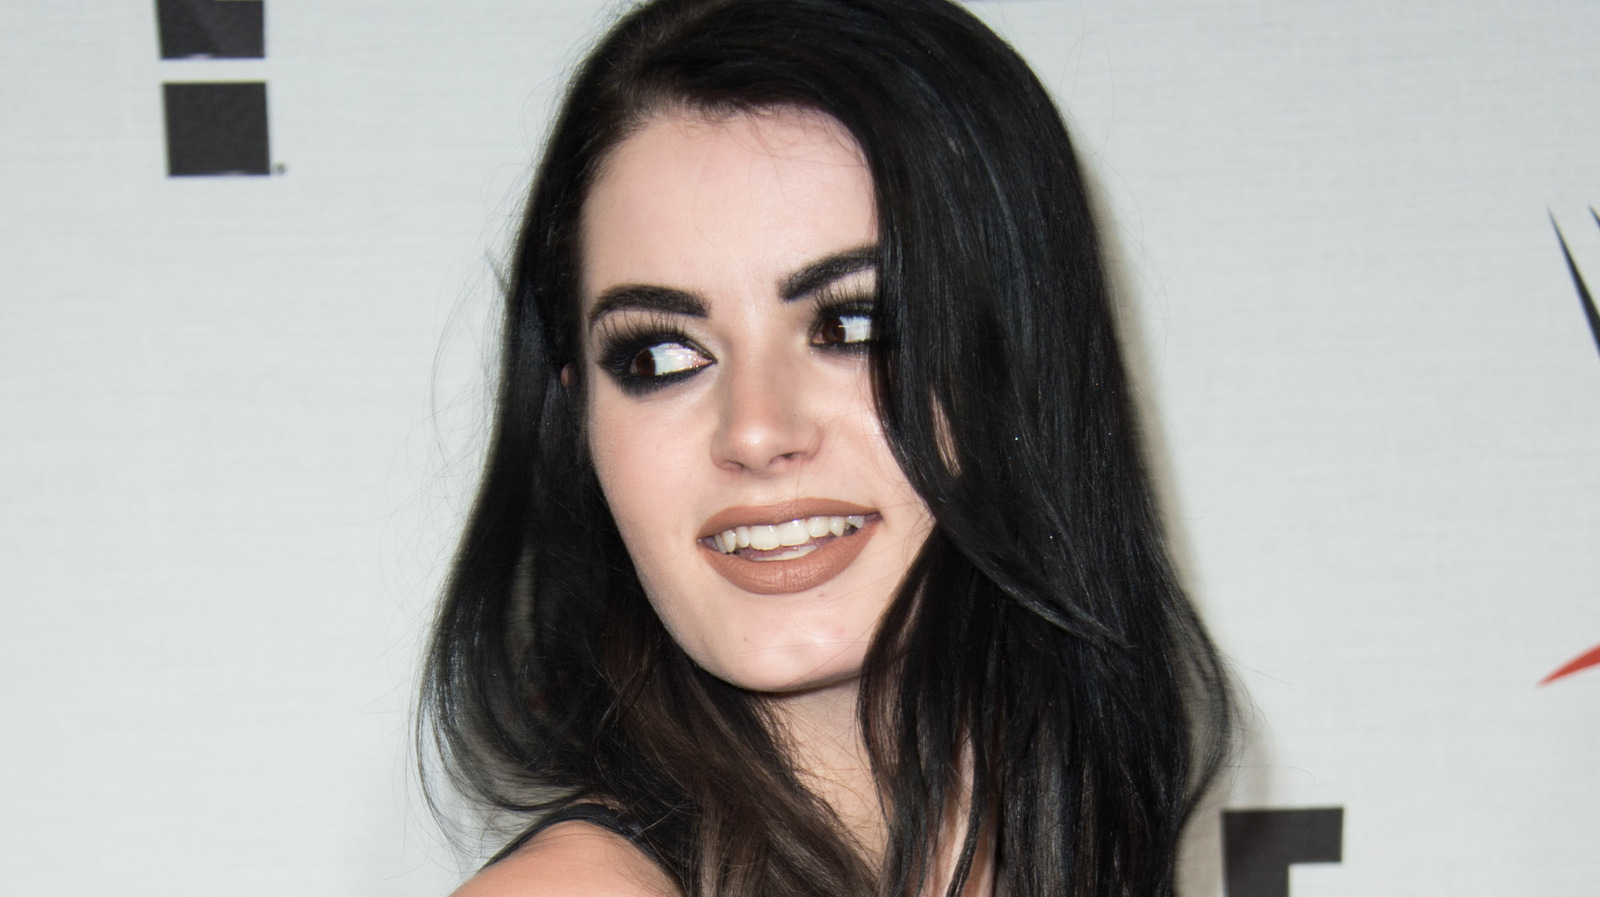 Wwe Paigexxx - Paige Recalls Hitting Rock Bottom When Salacious Videos And Photos Leaked